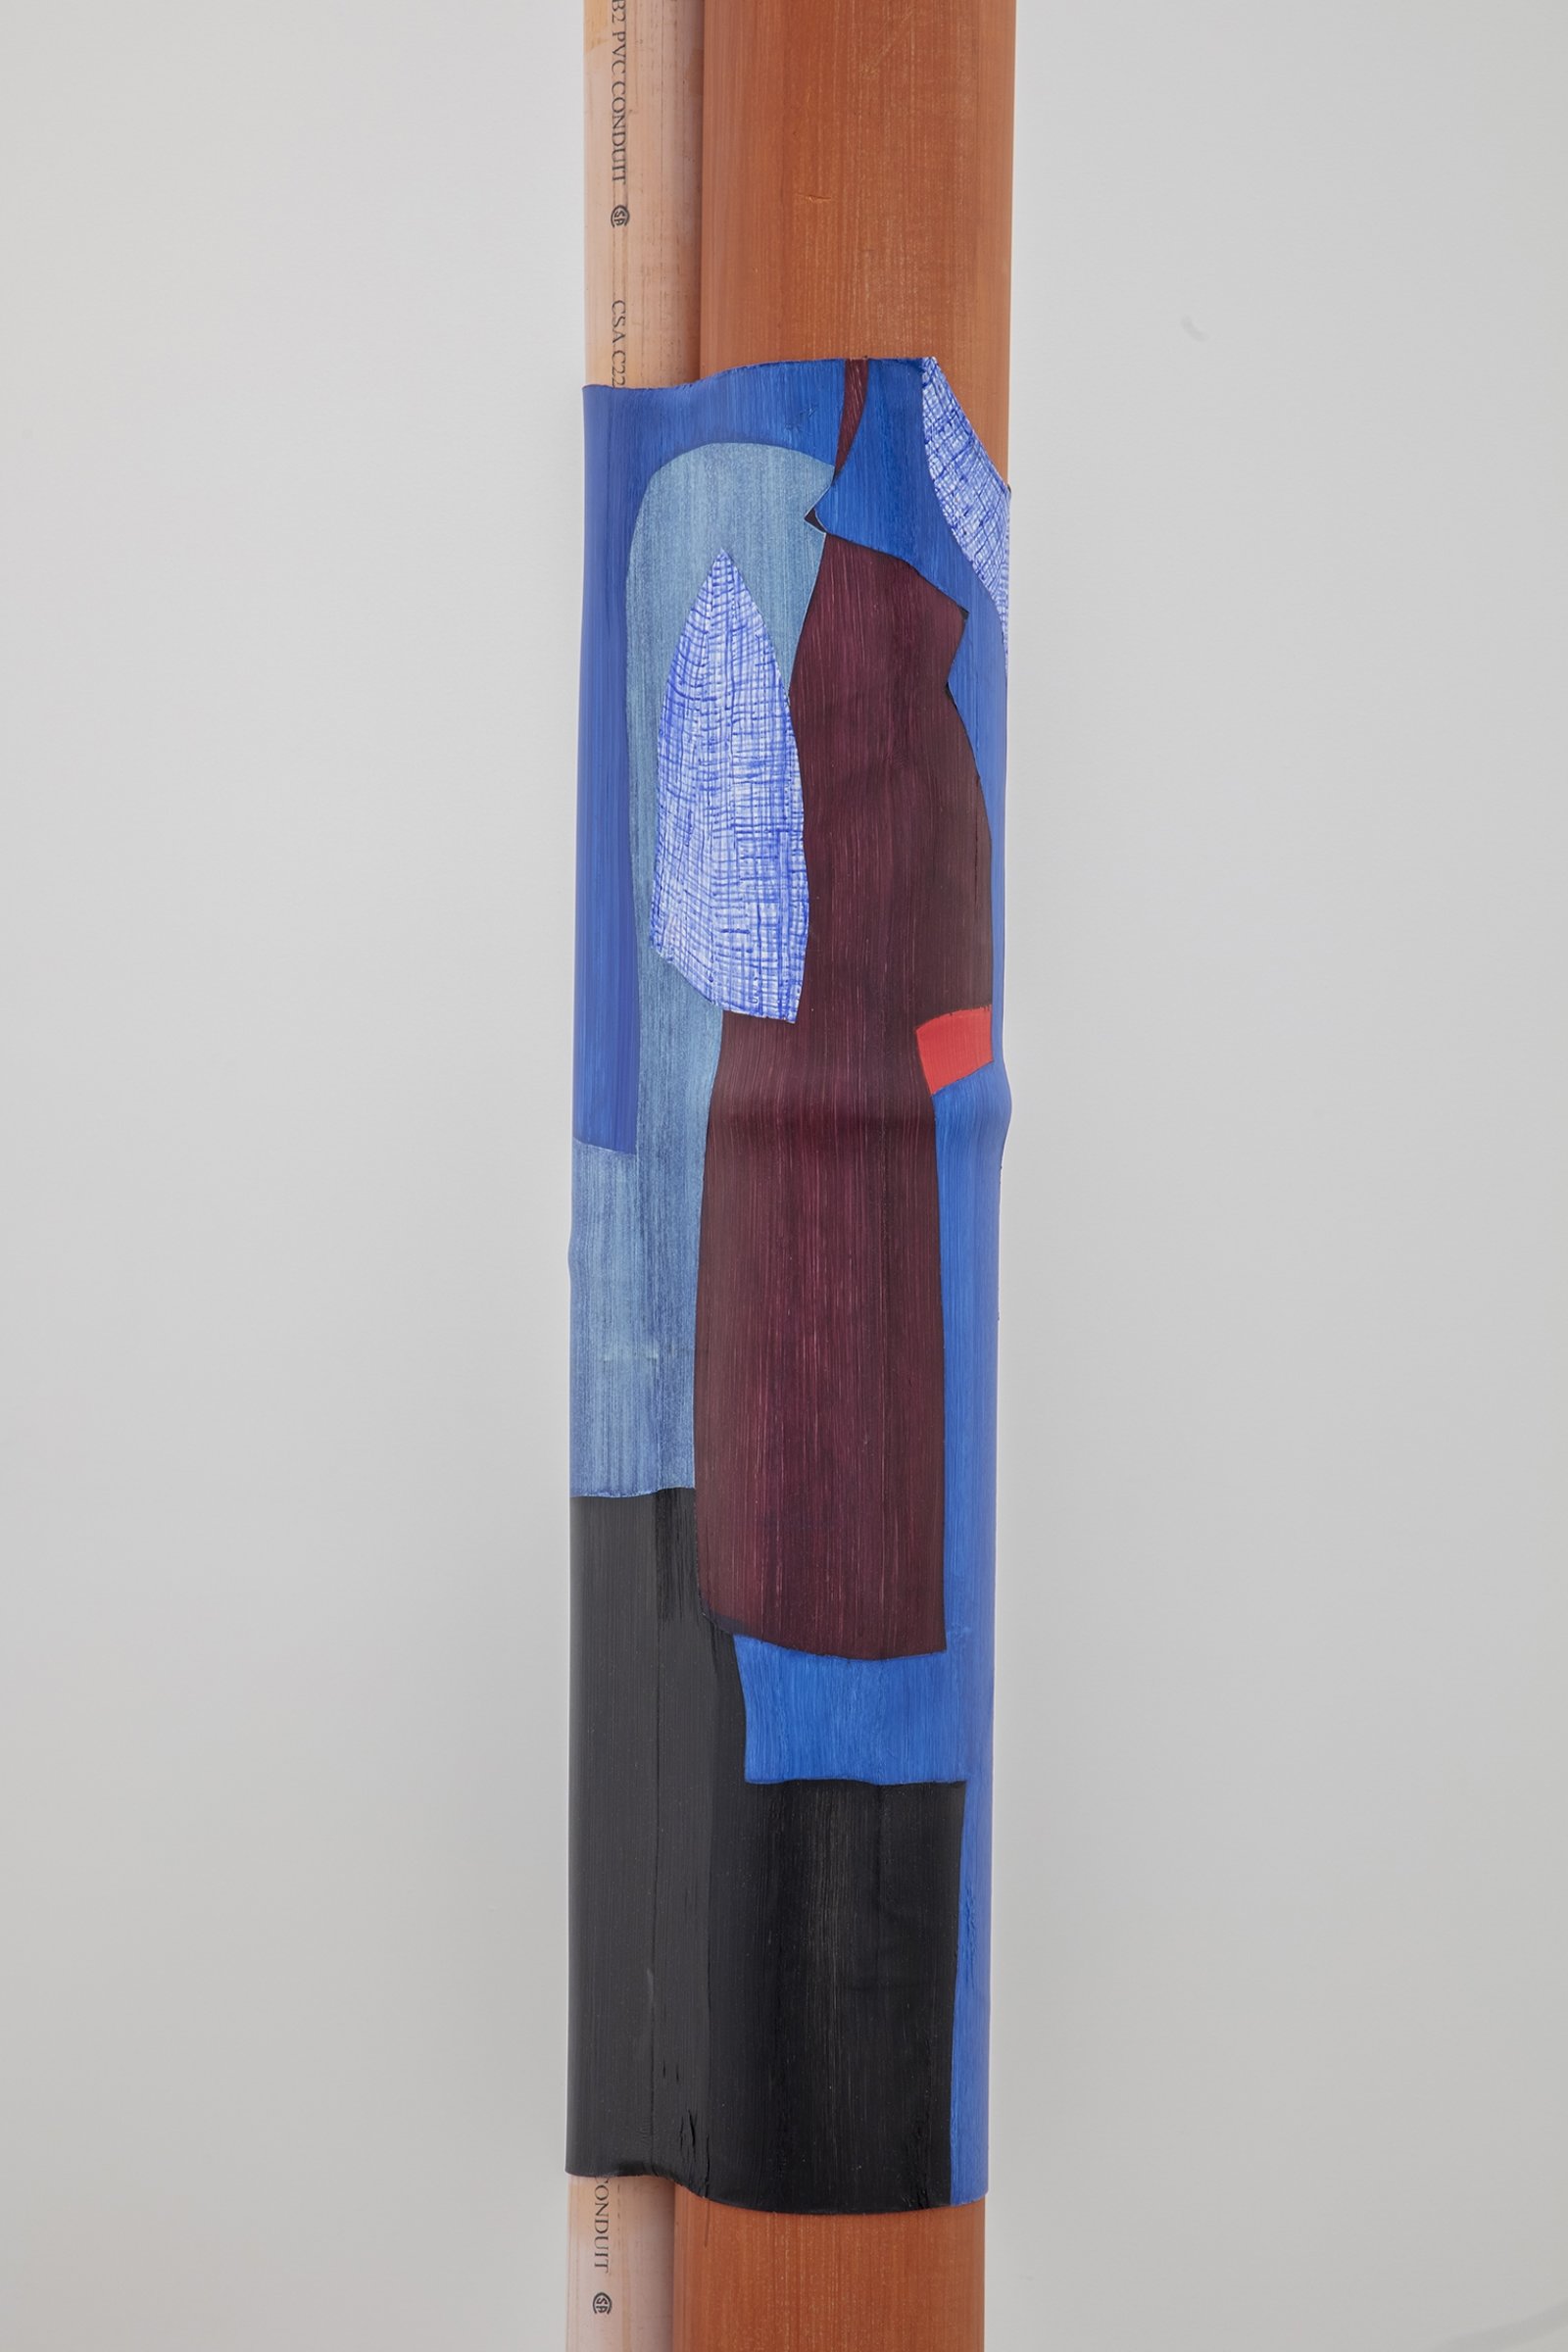 Valérie Blass, So what are your skills? (detail), 2019, pvc pipes, heat-shrink tubing, paint, copper, inkjet print on polyester, 40 x 11 x 12 in. (100 x 27 x 30 cm), 11 x 9 x 1 in. (28 x 23 x 3 cm). Installation view, Le parlement des invisibles, Art Gallery of Ontario, Toronto, Canada, 2019